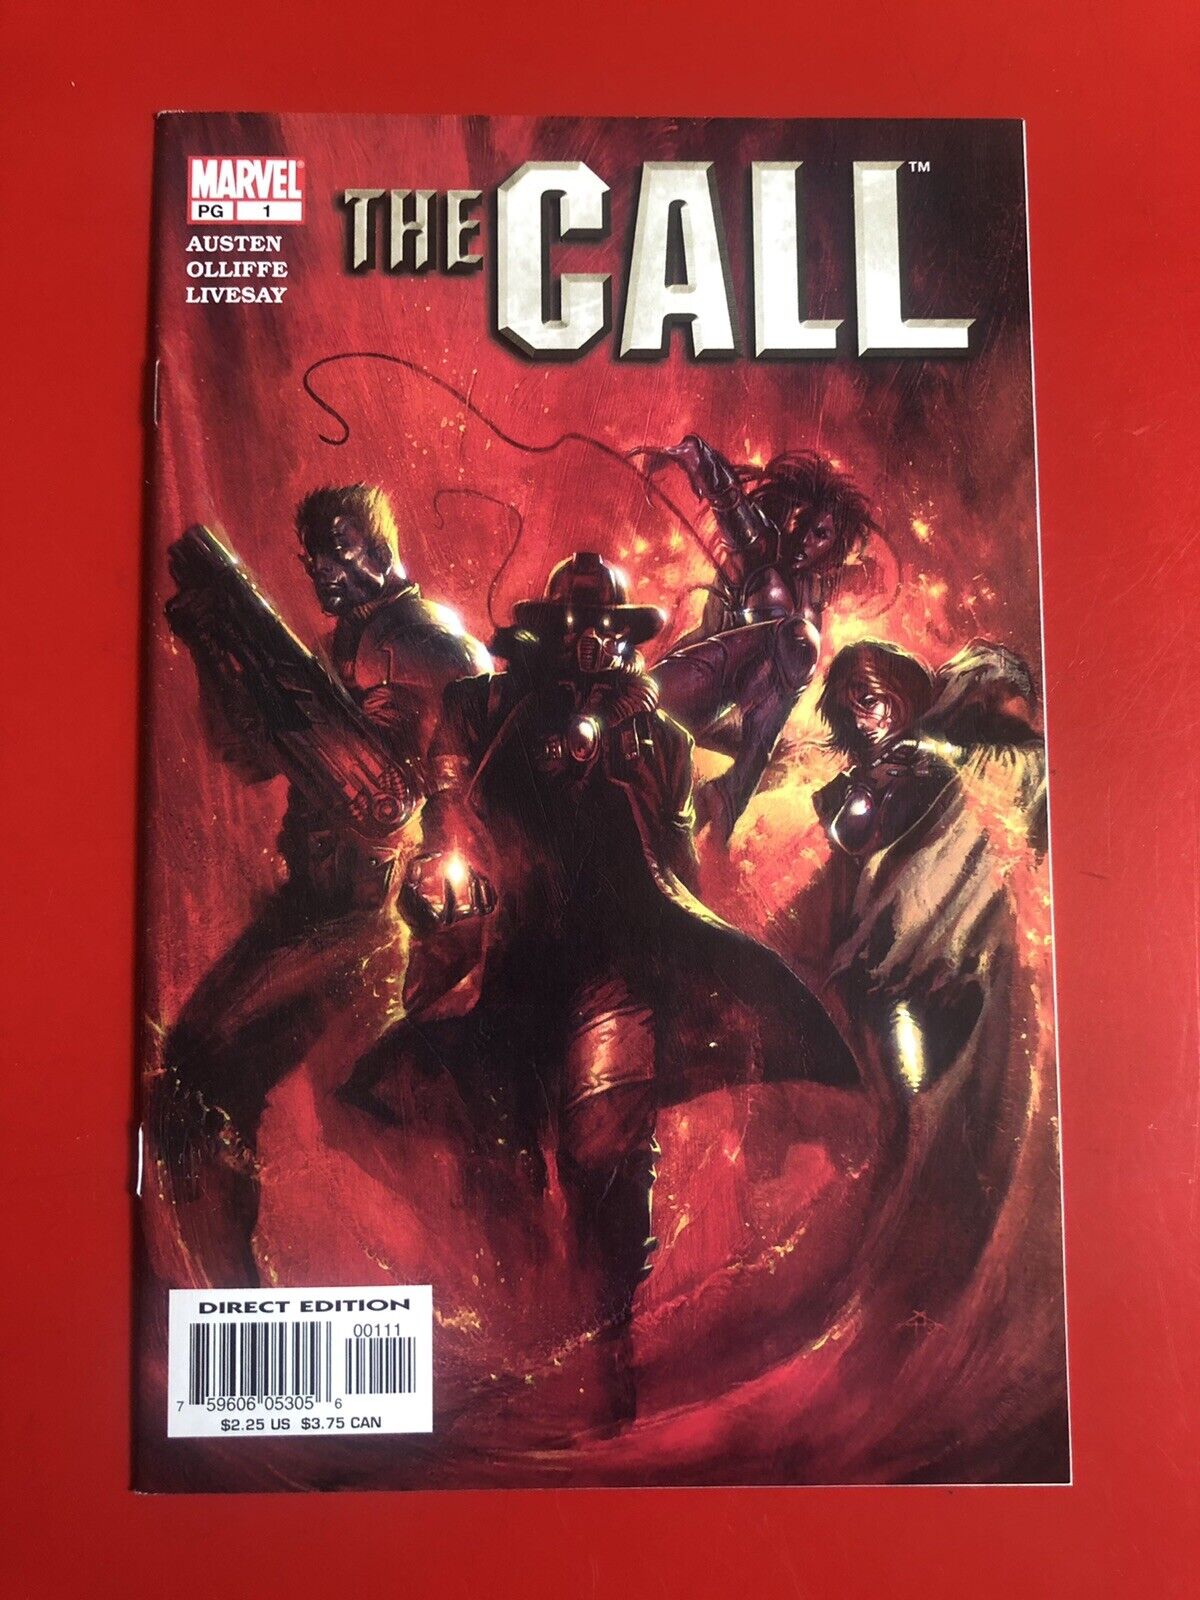 The Call #1 (Marvel, 2003)